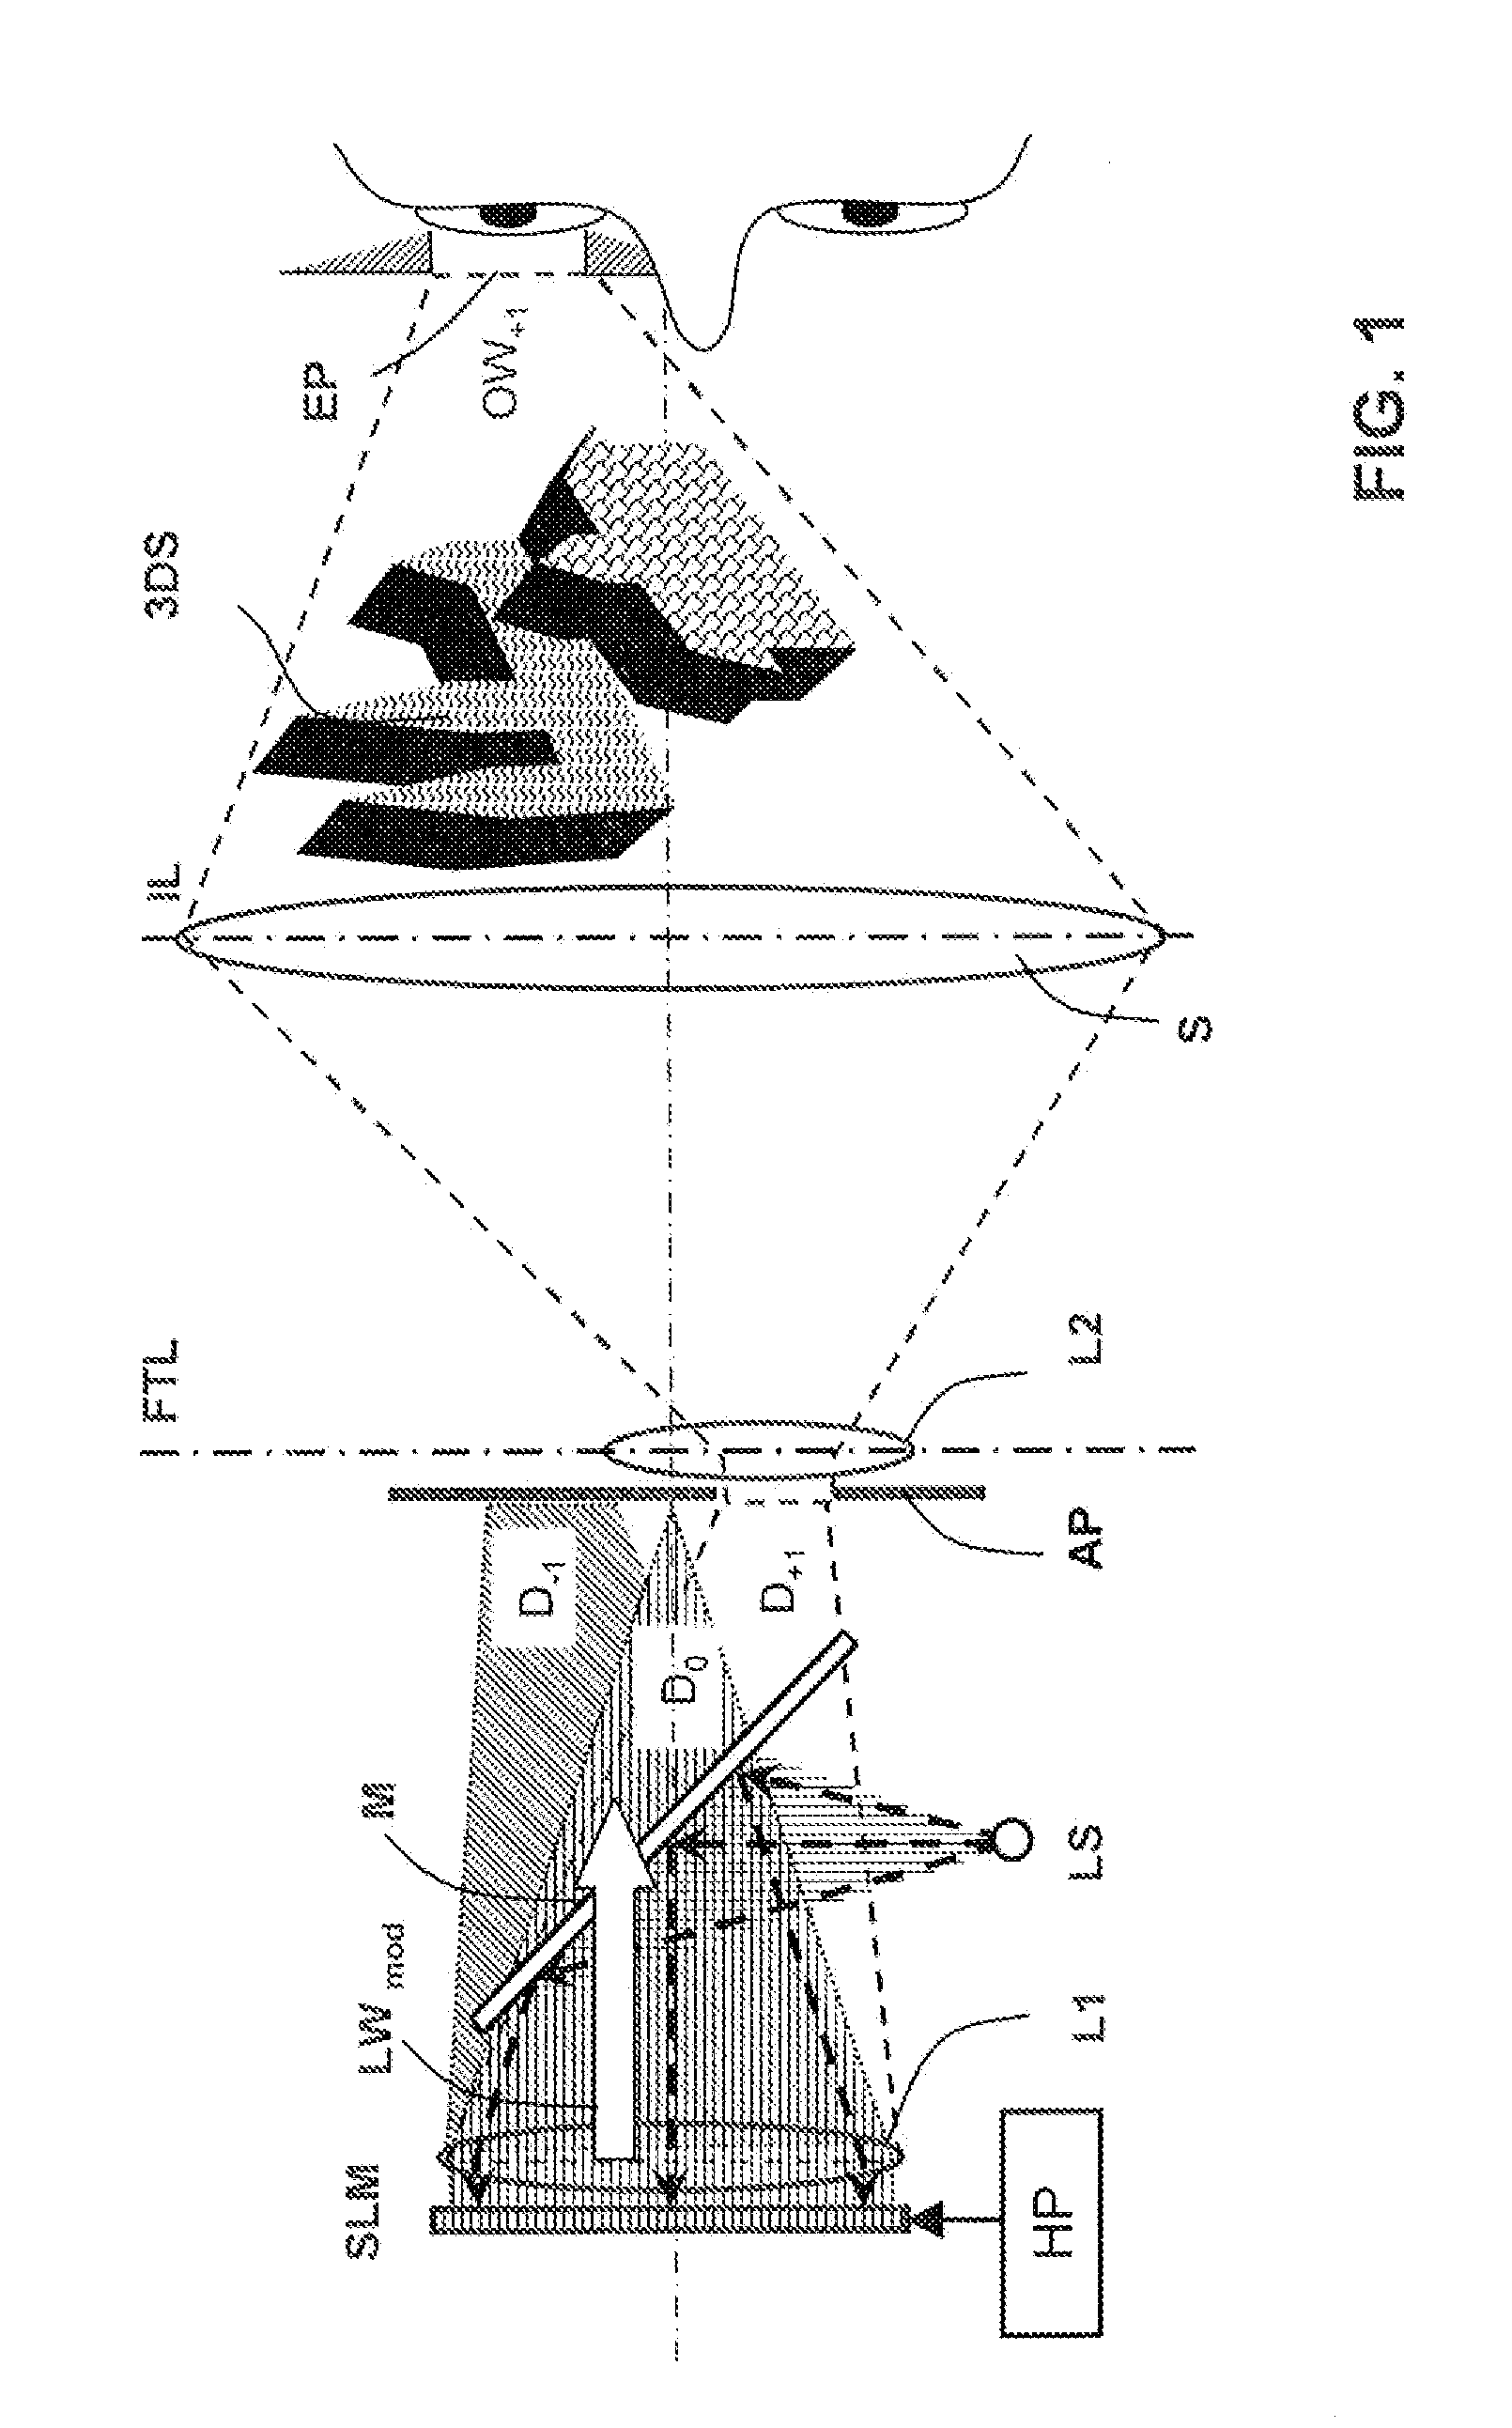 Holographic Projection System Using Micro-Mirrors for Light Modulation